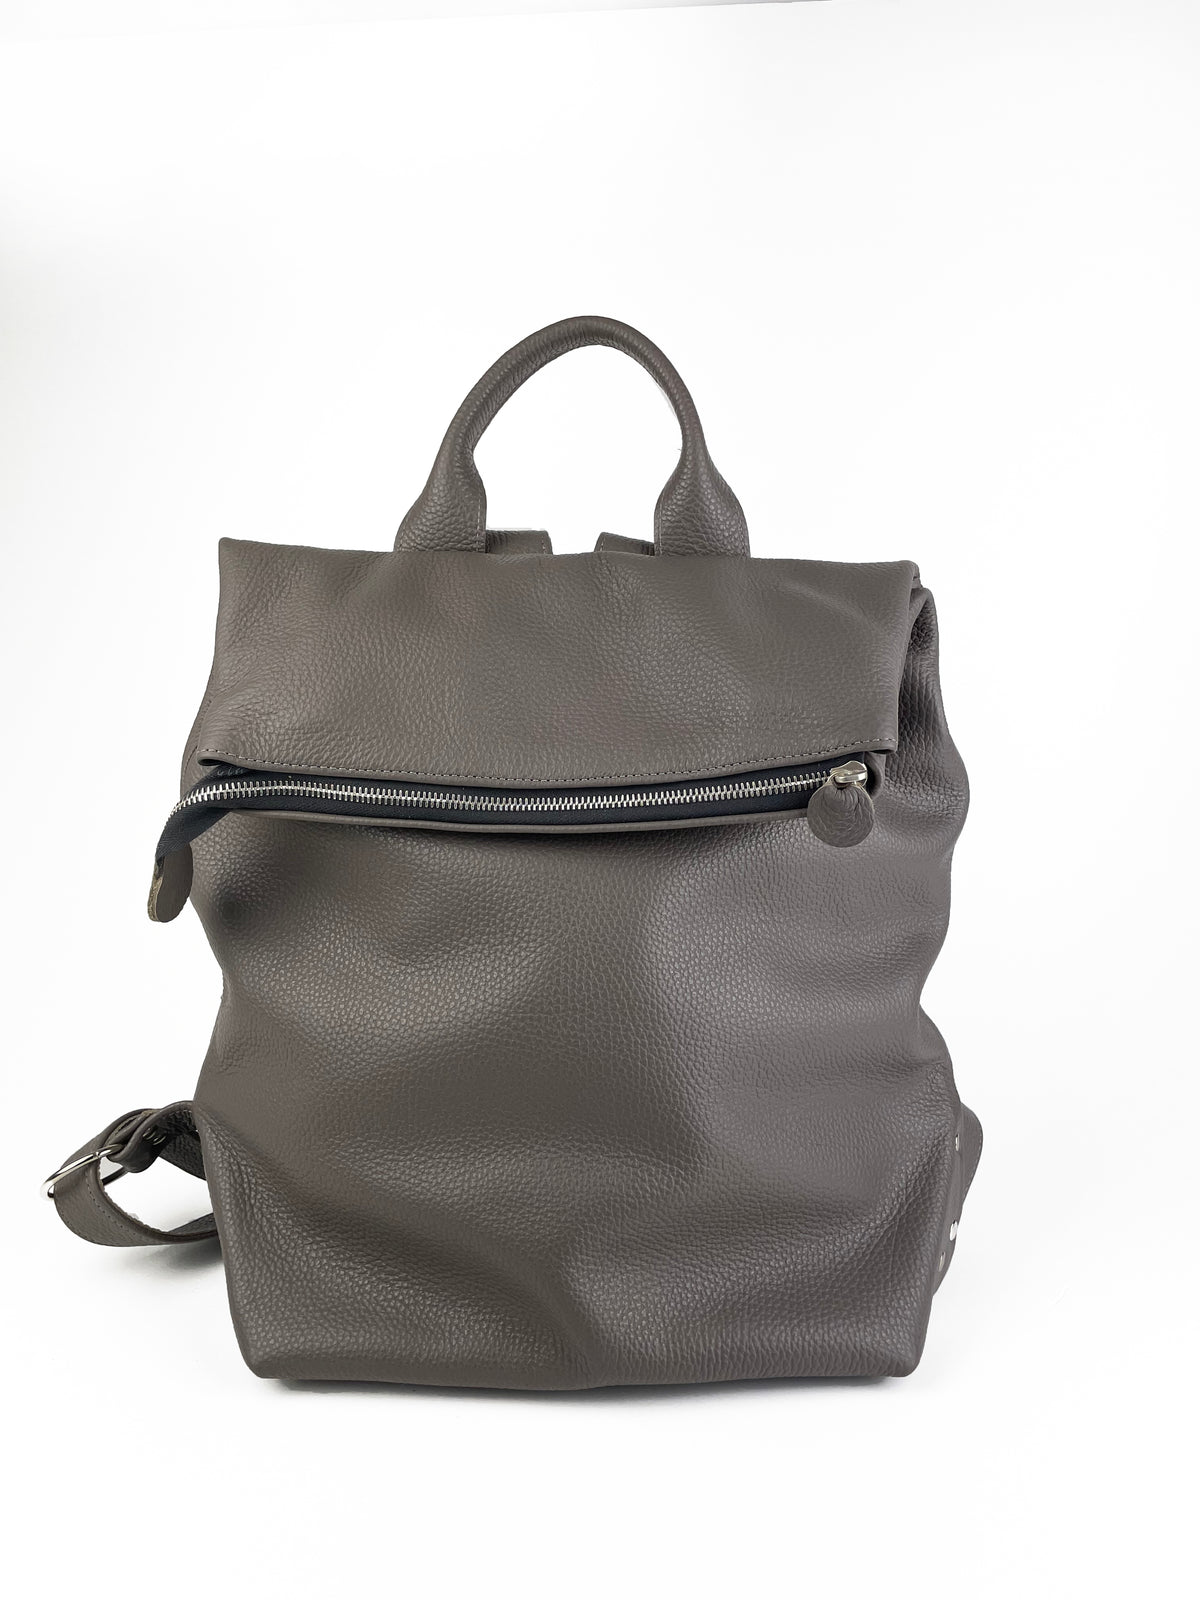 Nancy Rucksack in Taupe Pebble Leather